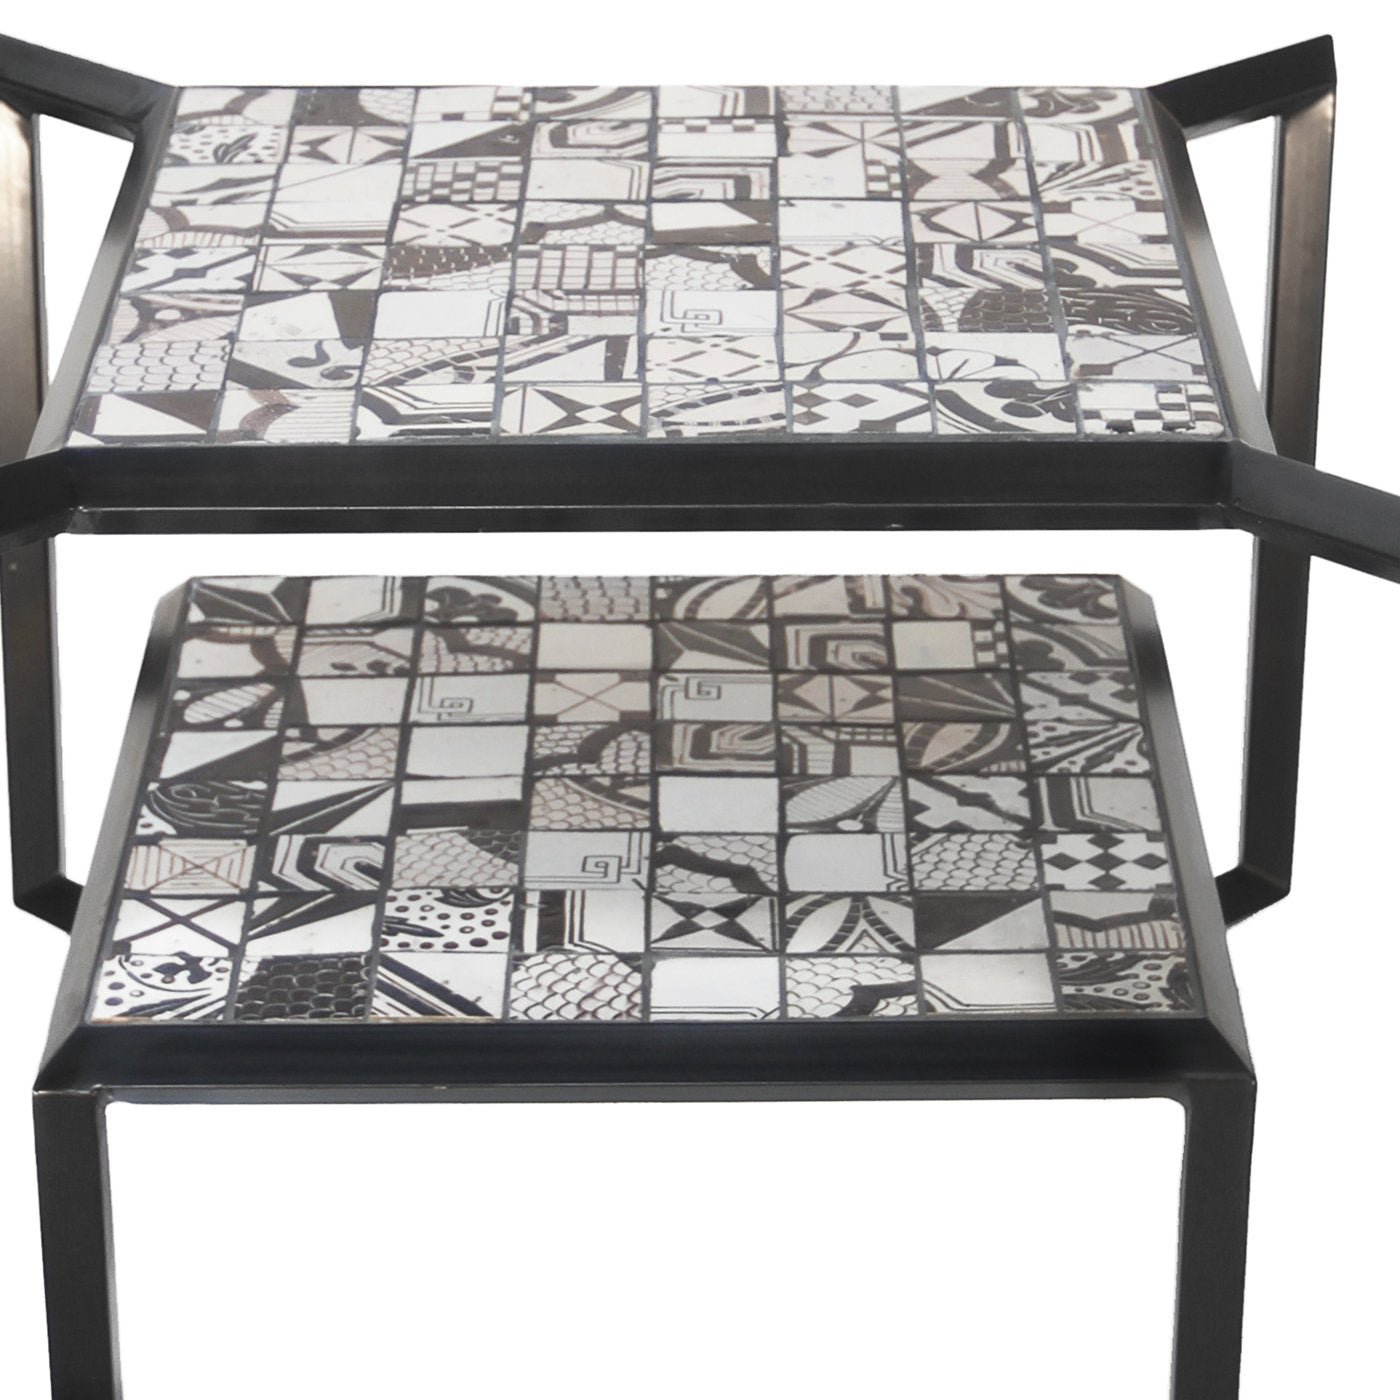 Black and White Spider Mosaic Tile Table - Alternative view 5